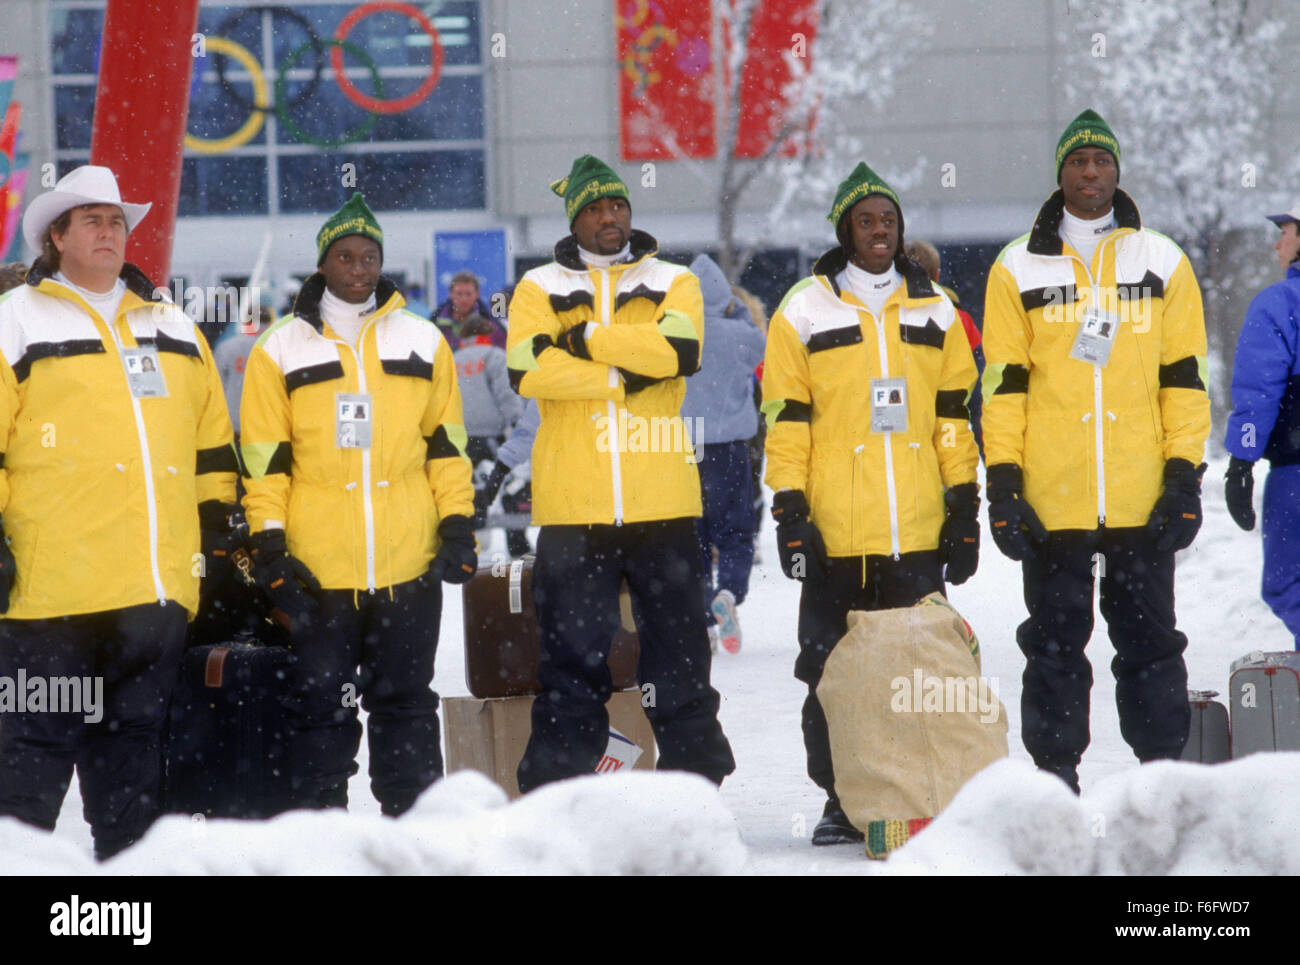 Oct 01, 1993;  Calagry, CANADA; Actor JOHN CANDY stars as Irving 'Irv' Blizter with LEON as Derice Bannock, DOUG E DOUG as Sanka Coffie, Rawle D.LEWIS as Junior Bevil and MALIK YOBA as yul Brenner in 'Cool Runnings.' Stock Photo